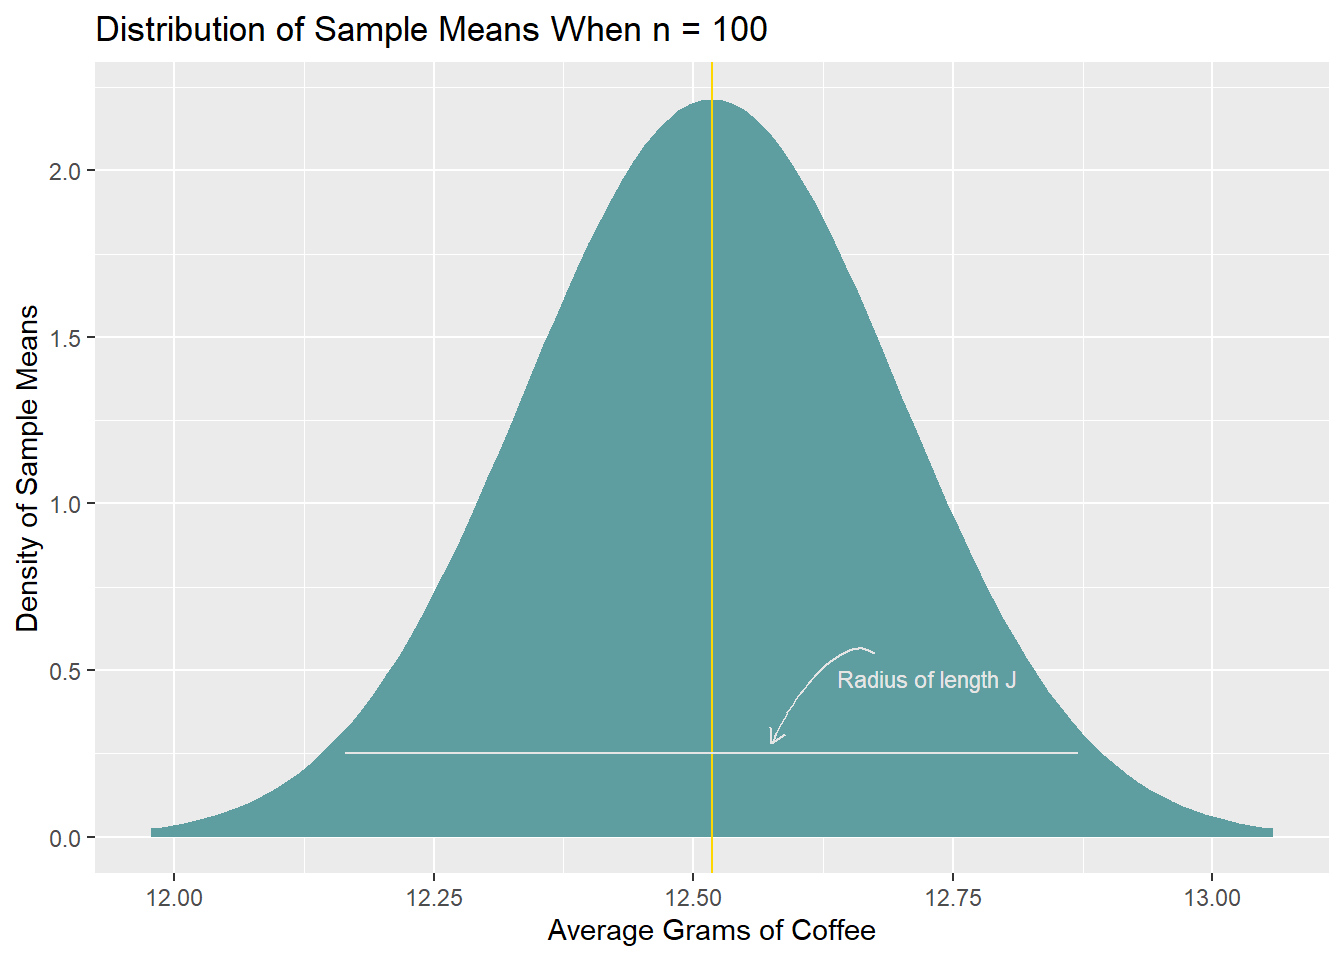 sampling distribution of average grams of coffee used, n = 100 per sample, with confidence interval superimposed at center of distribution